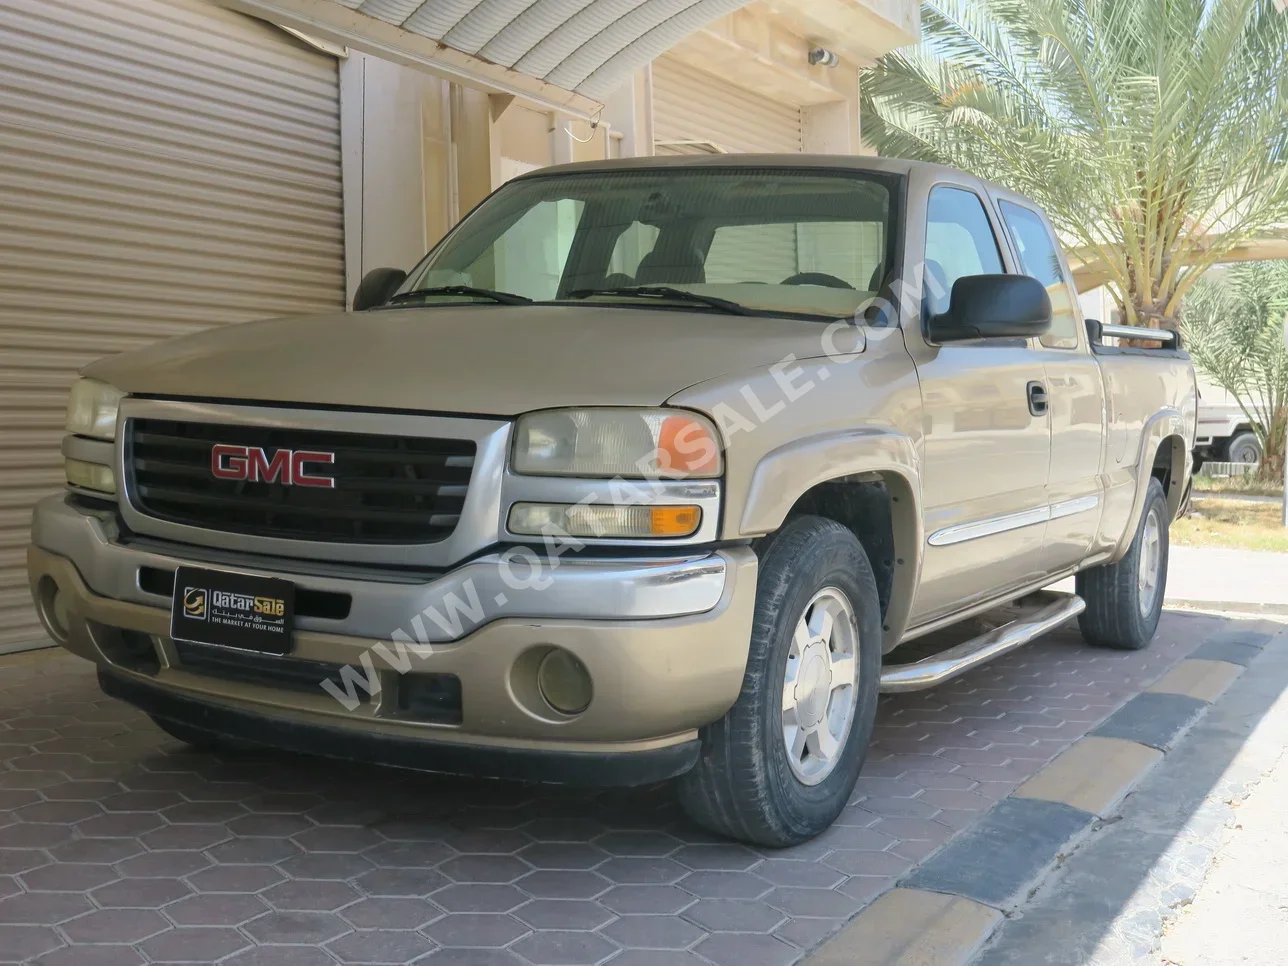 GMC  Sierra  1500  2006  Automatic  292,000 Km  6 Cylinder  Four Wheel Drive (4WD)  Pick Up  Gold